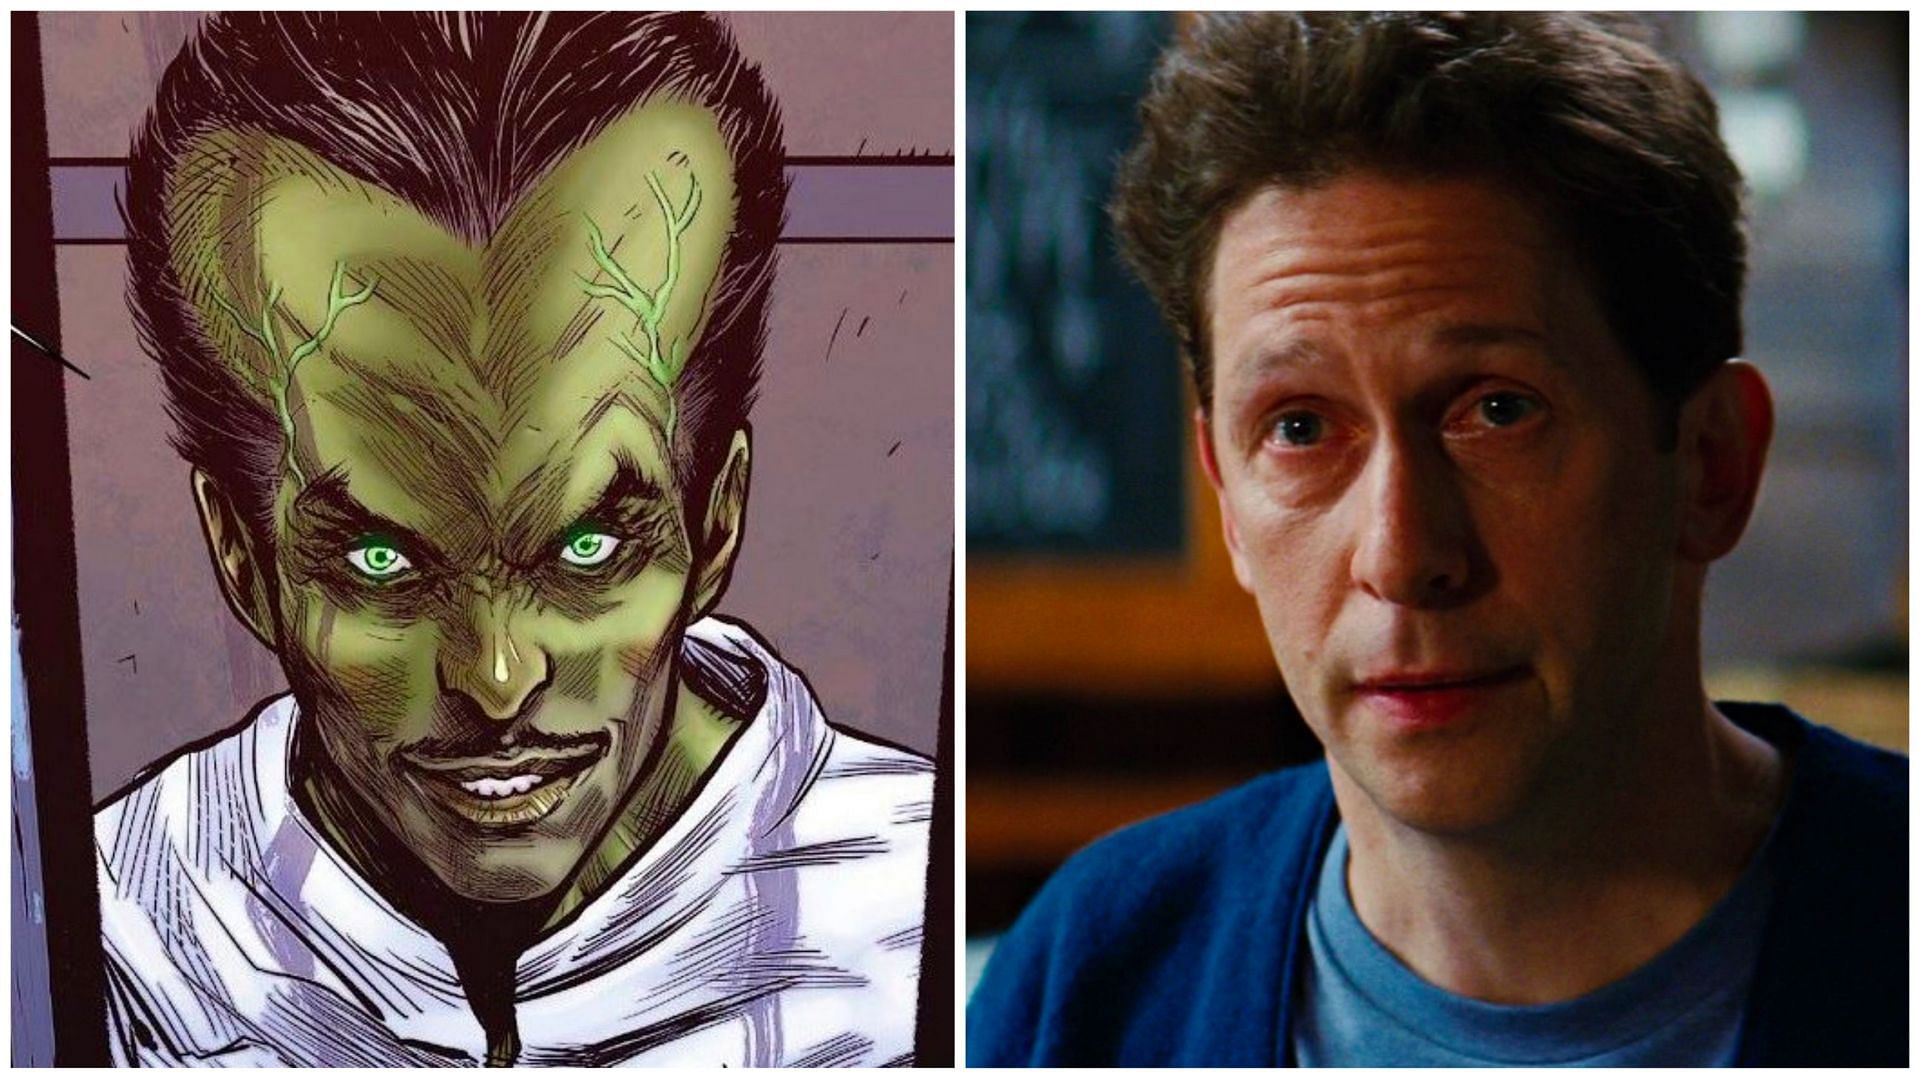 The Leader in the comics and Tim Blake Nelson as Samuel Sterns (Images via Marvel Comics and Marvel Studios)